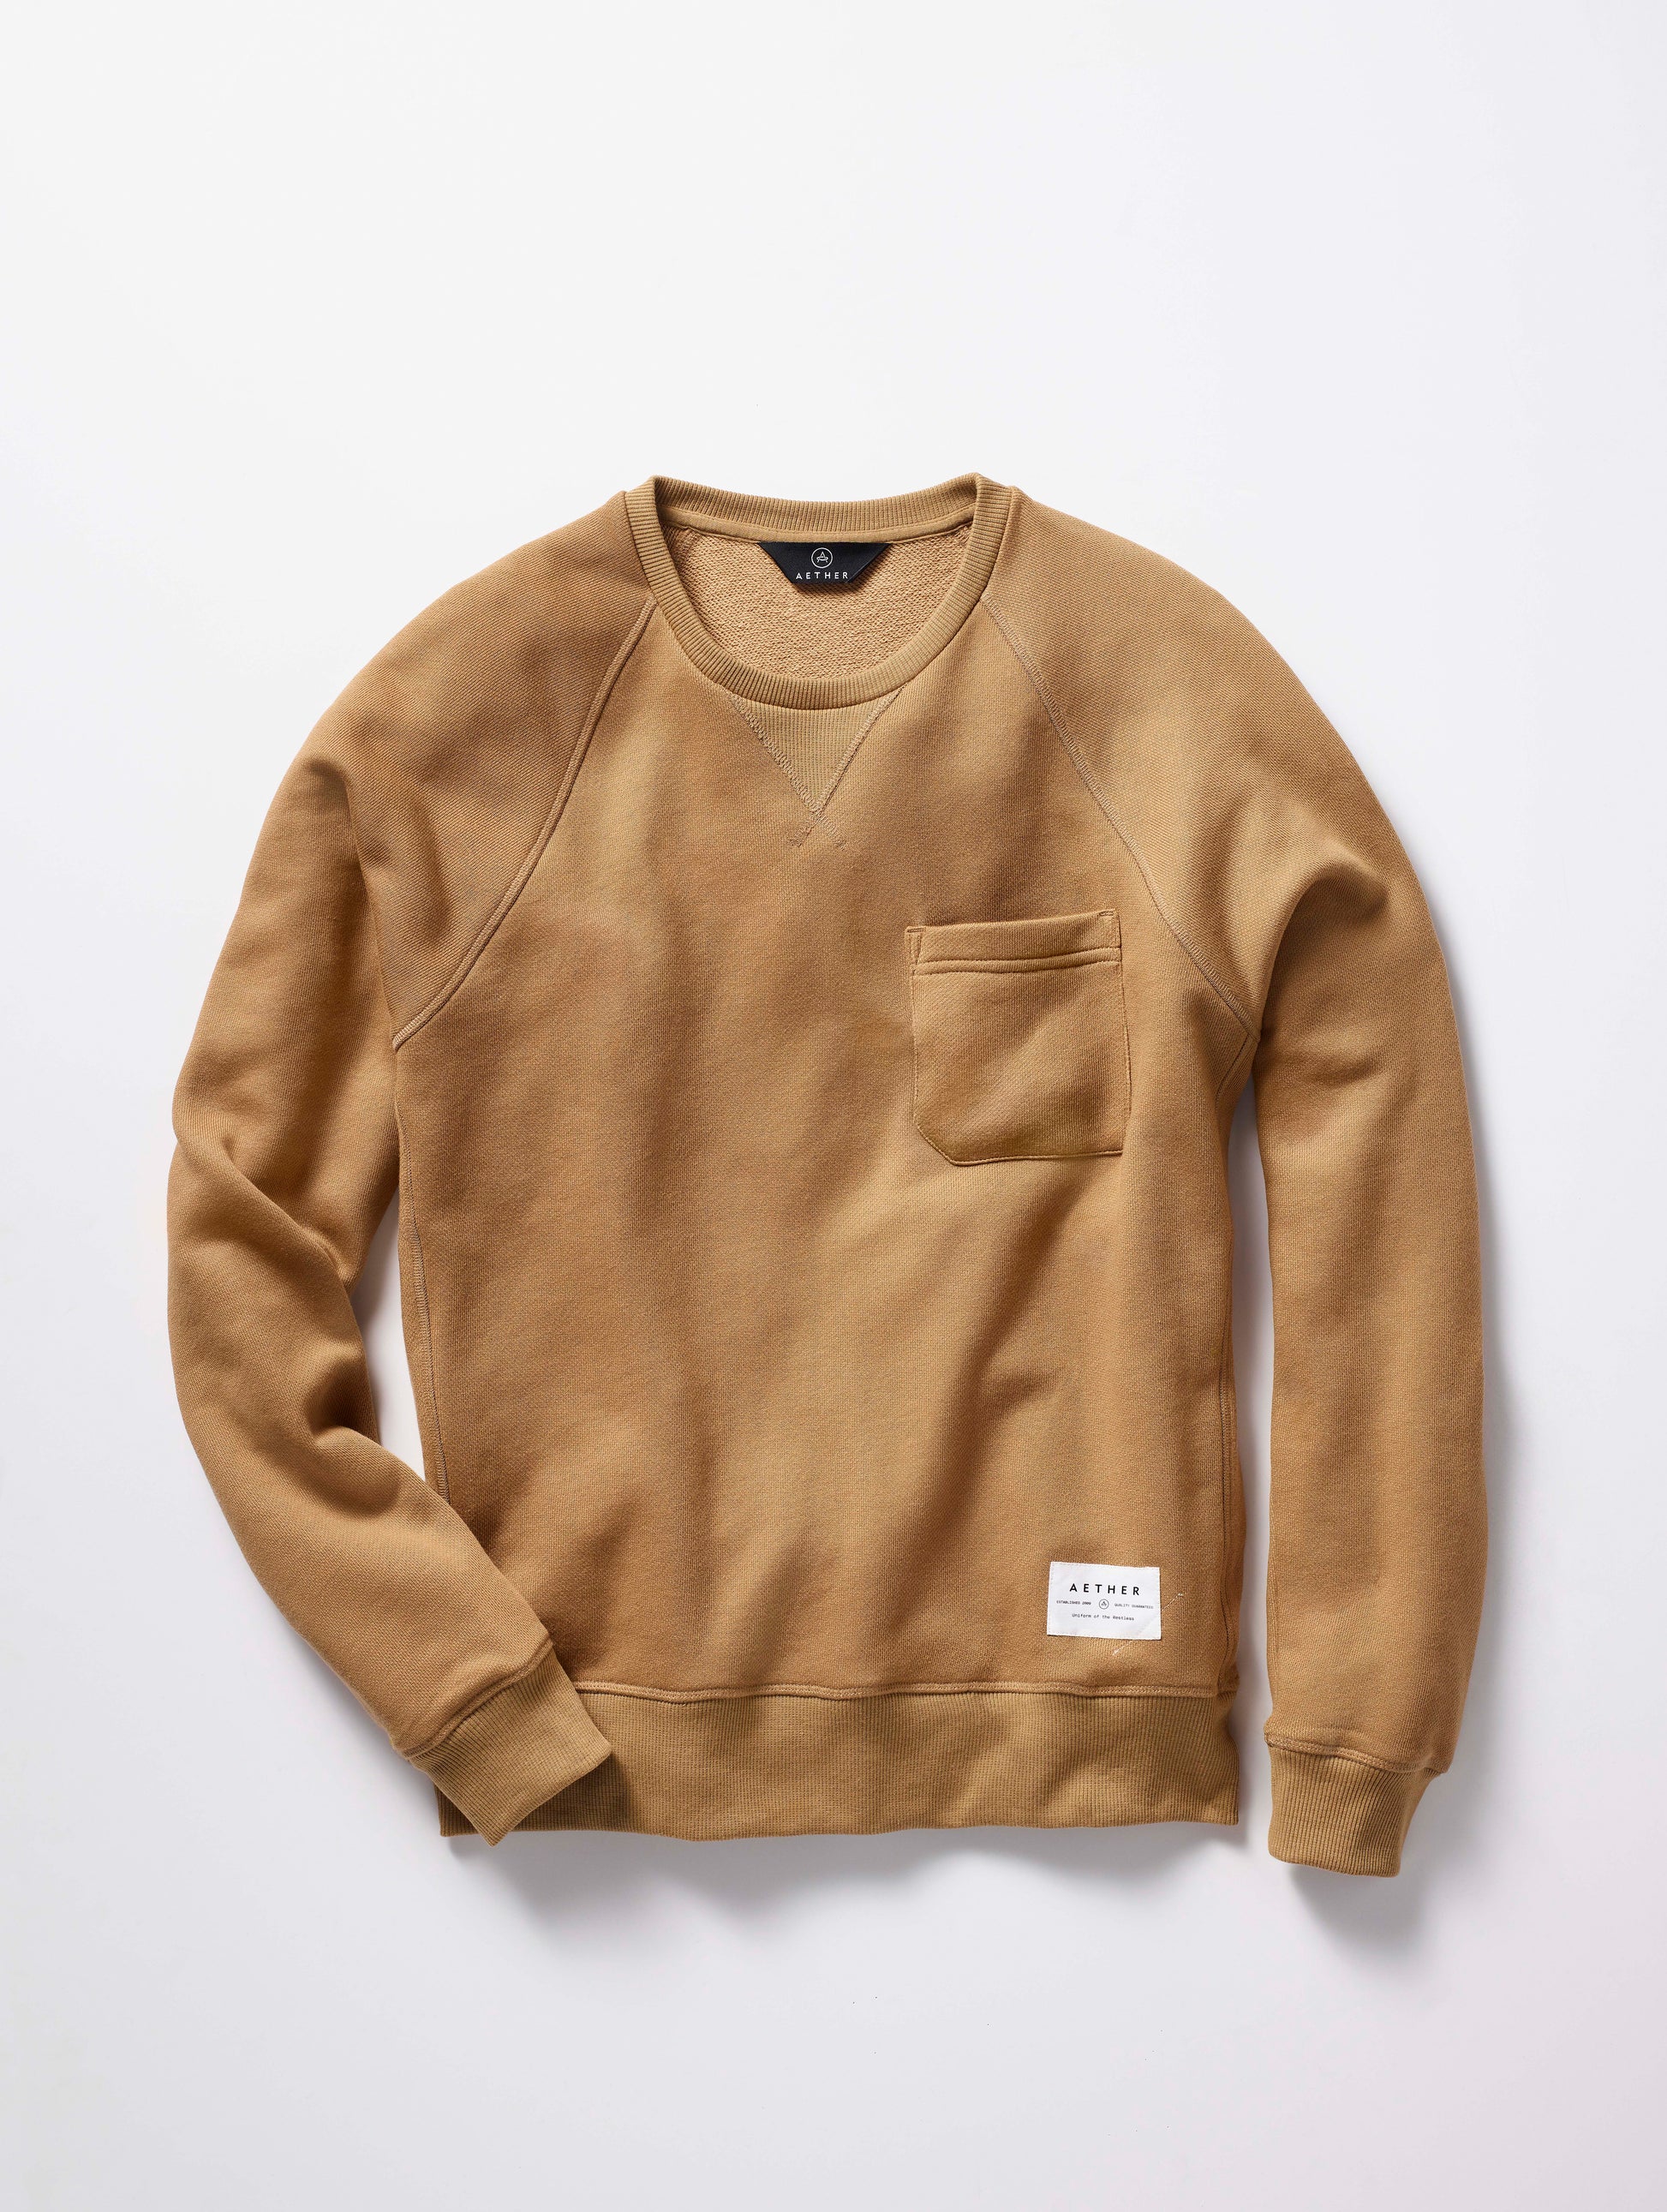 man wearing a brown crew neck with pocket